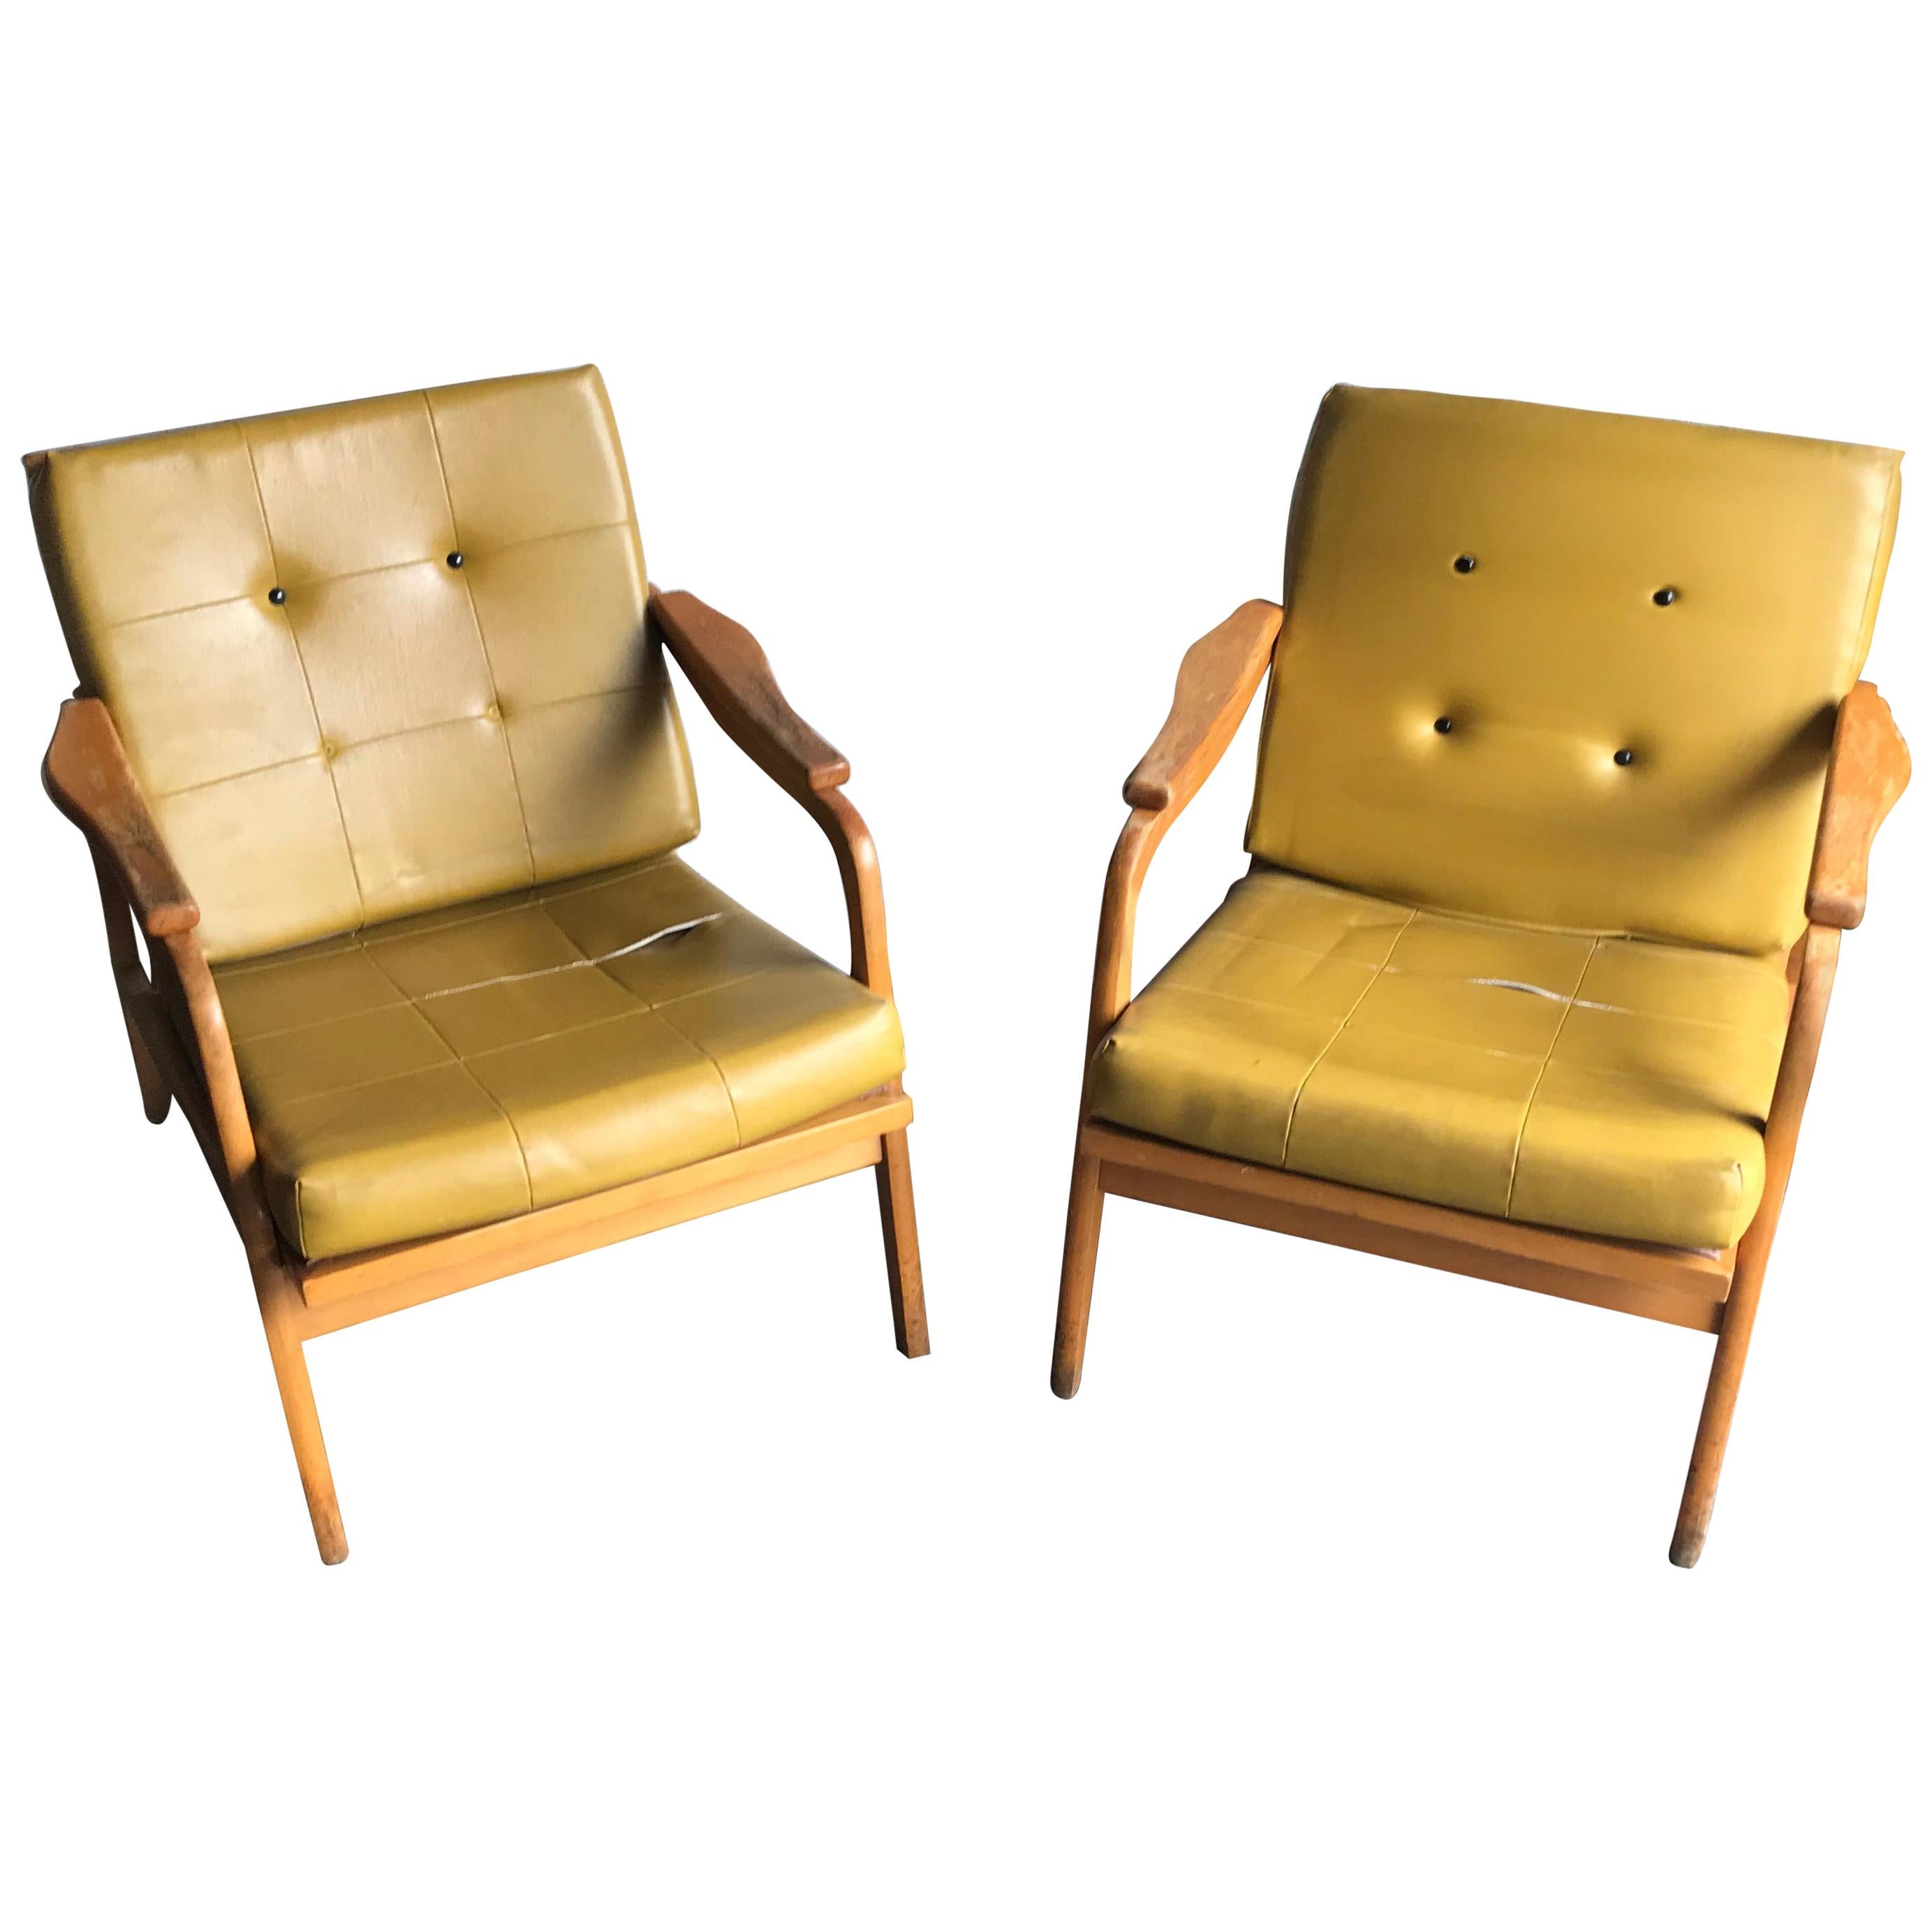 Midcentury Danish Style Wooden Lounge Armchairs, 1960s For Sale